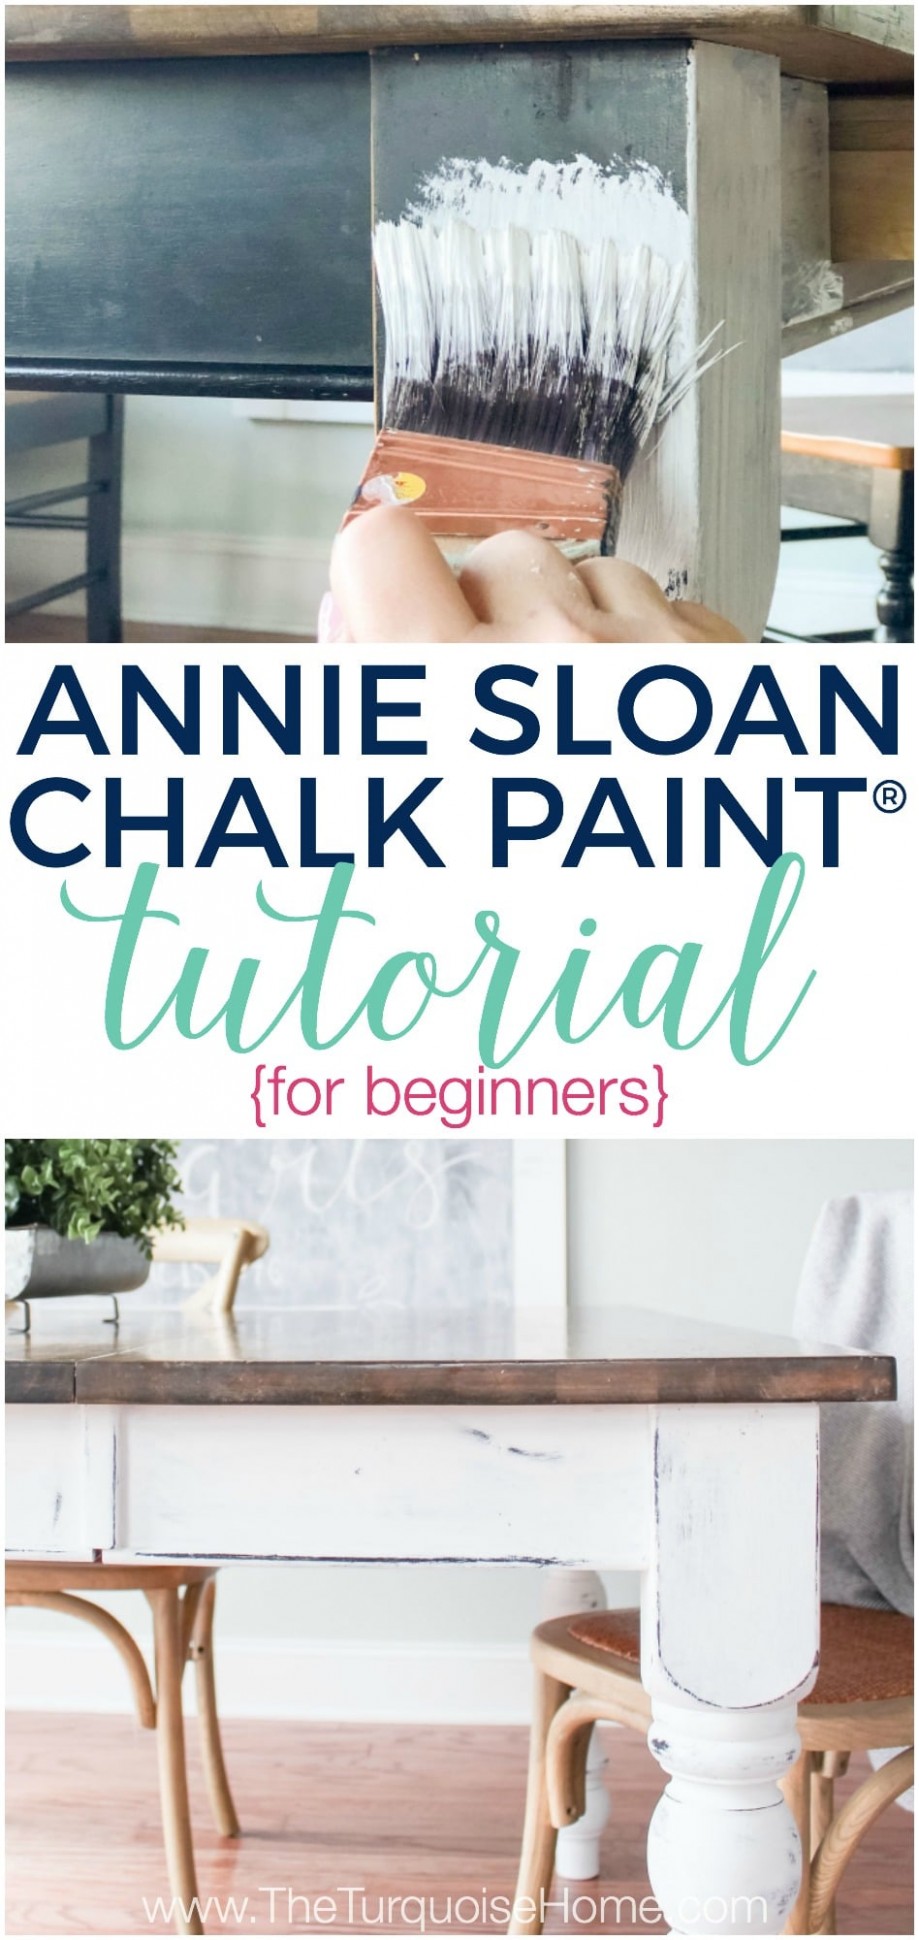 How To Use Annie Sloan Chalk Paint (perfect For Beginners!) Who Sells Annie Sloan Chalk Paint Locally